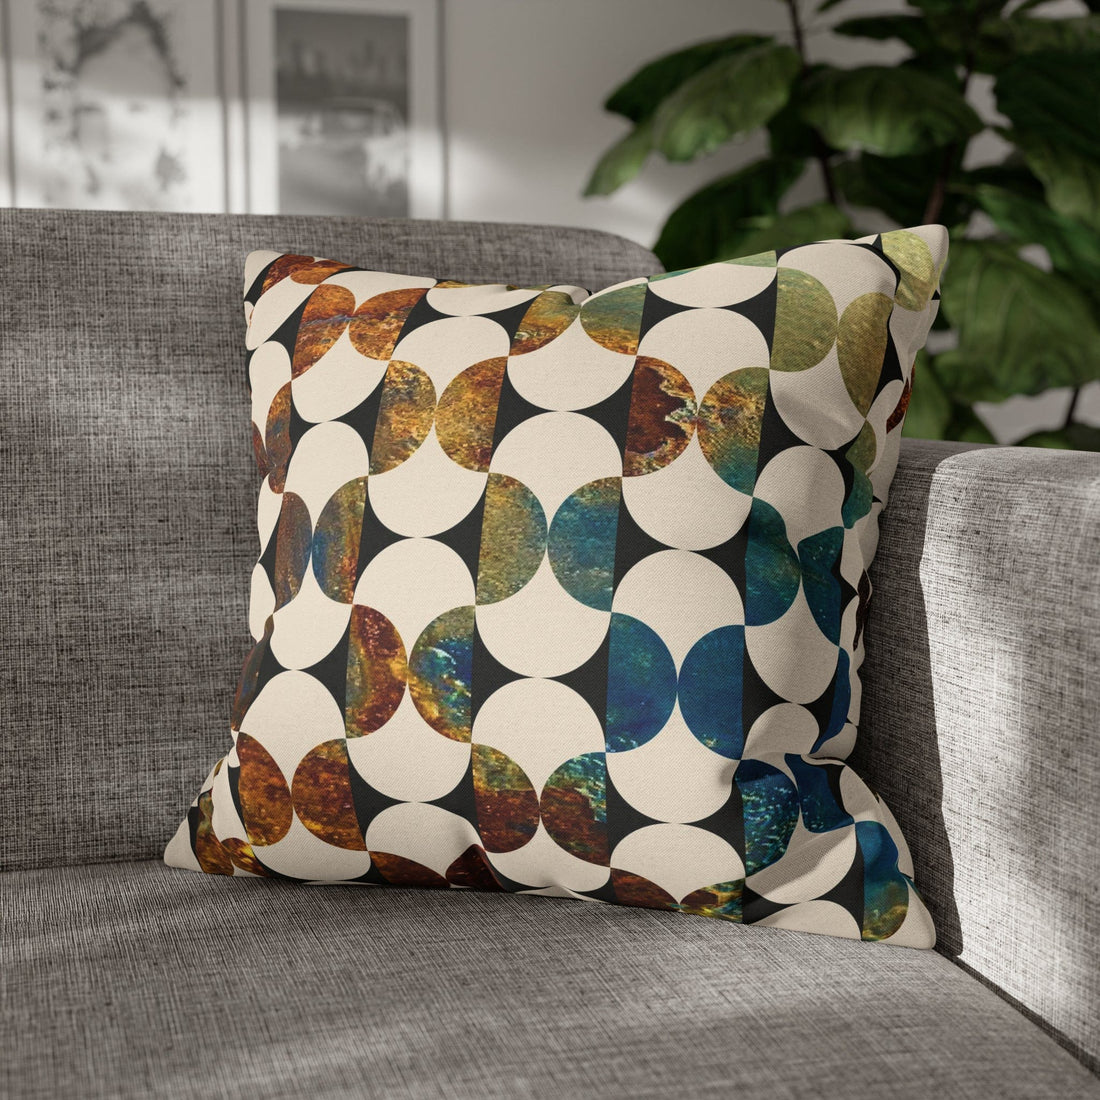 Kate McEnroe New York Mid Century Modern Geometric Abstract Throw Pillow Covers, Brown, Blue, Beige, 50s Retro Living Room, Bedroom Cushion CoversThrow Pillow Covers15602827663404342493